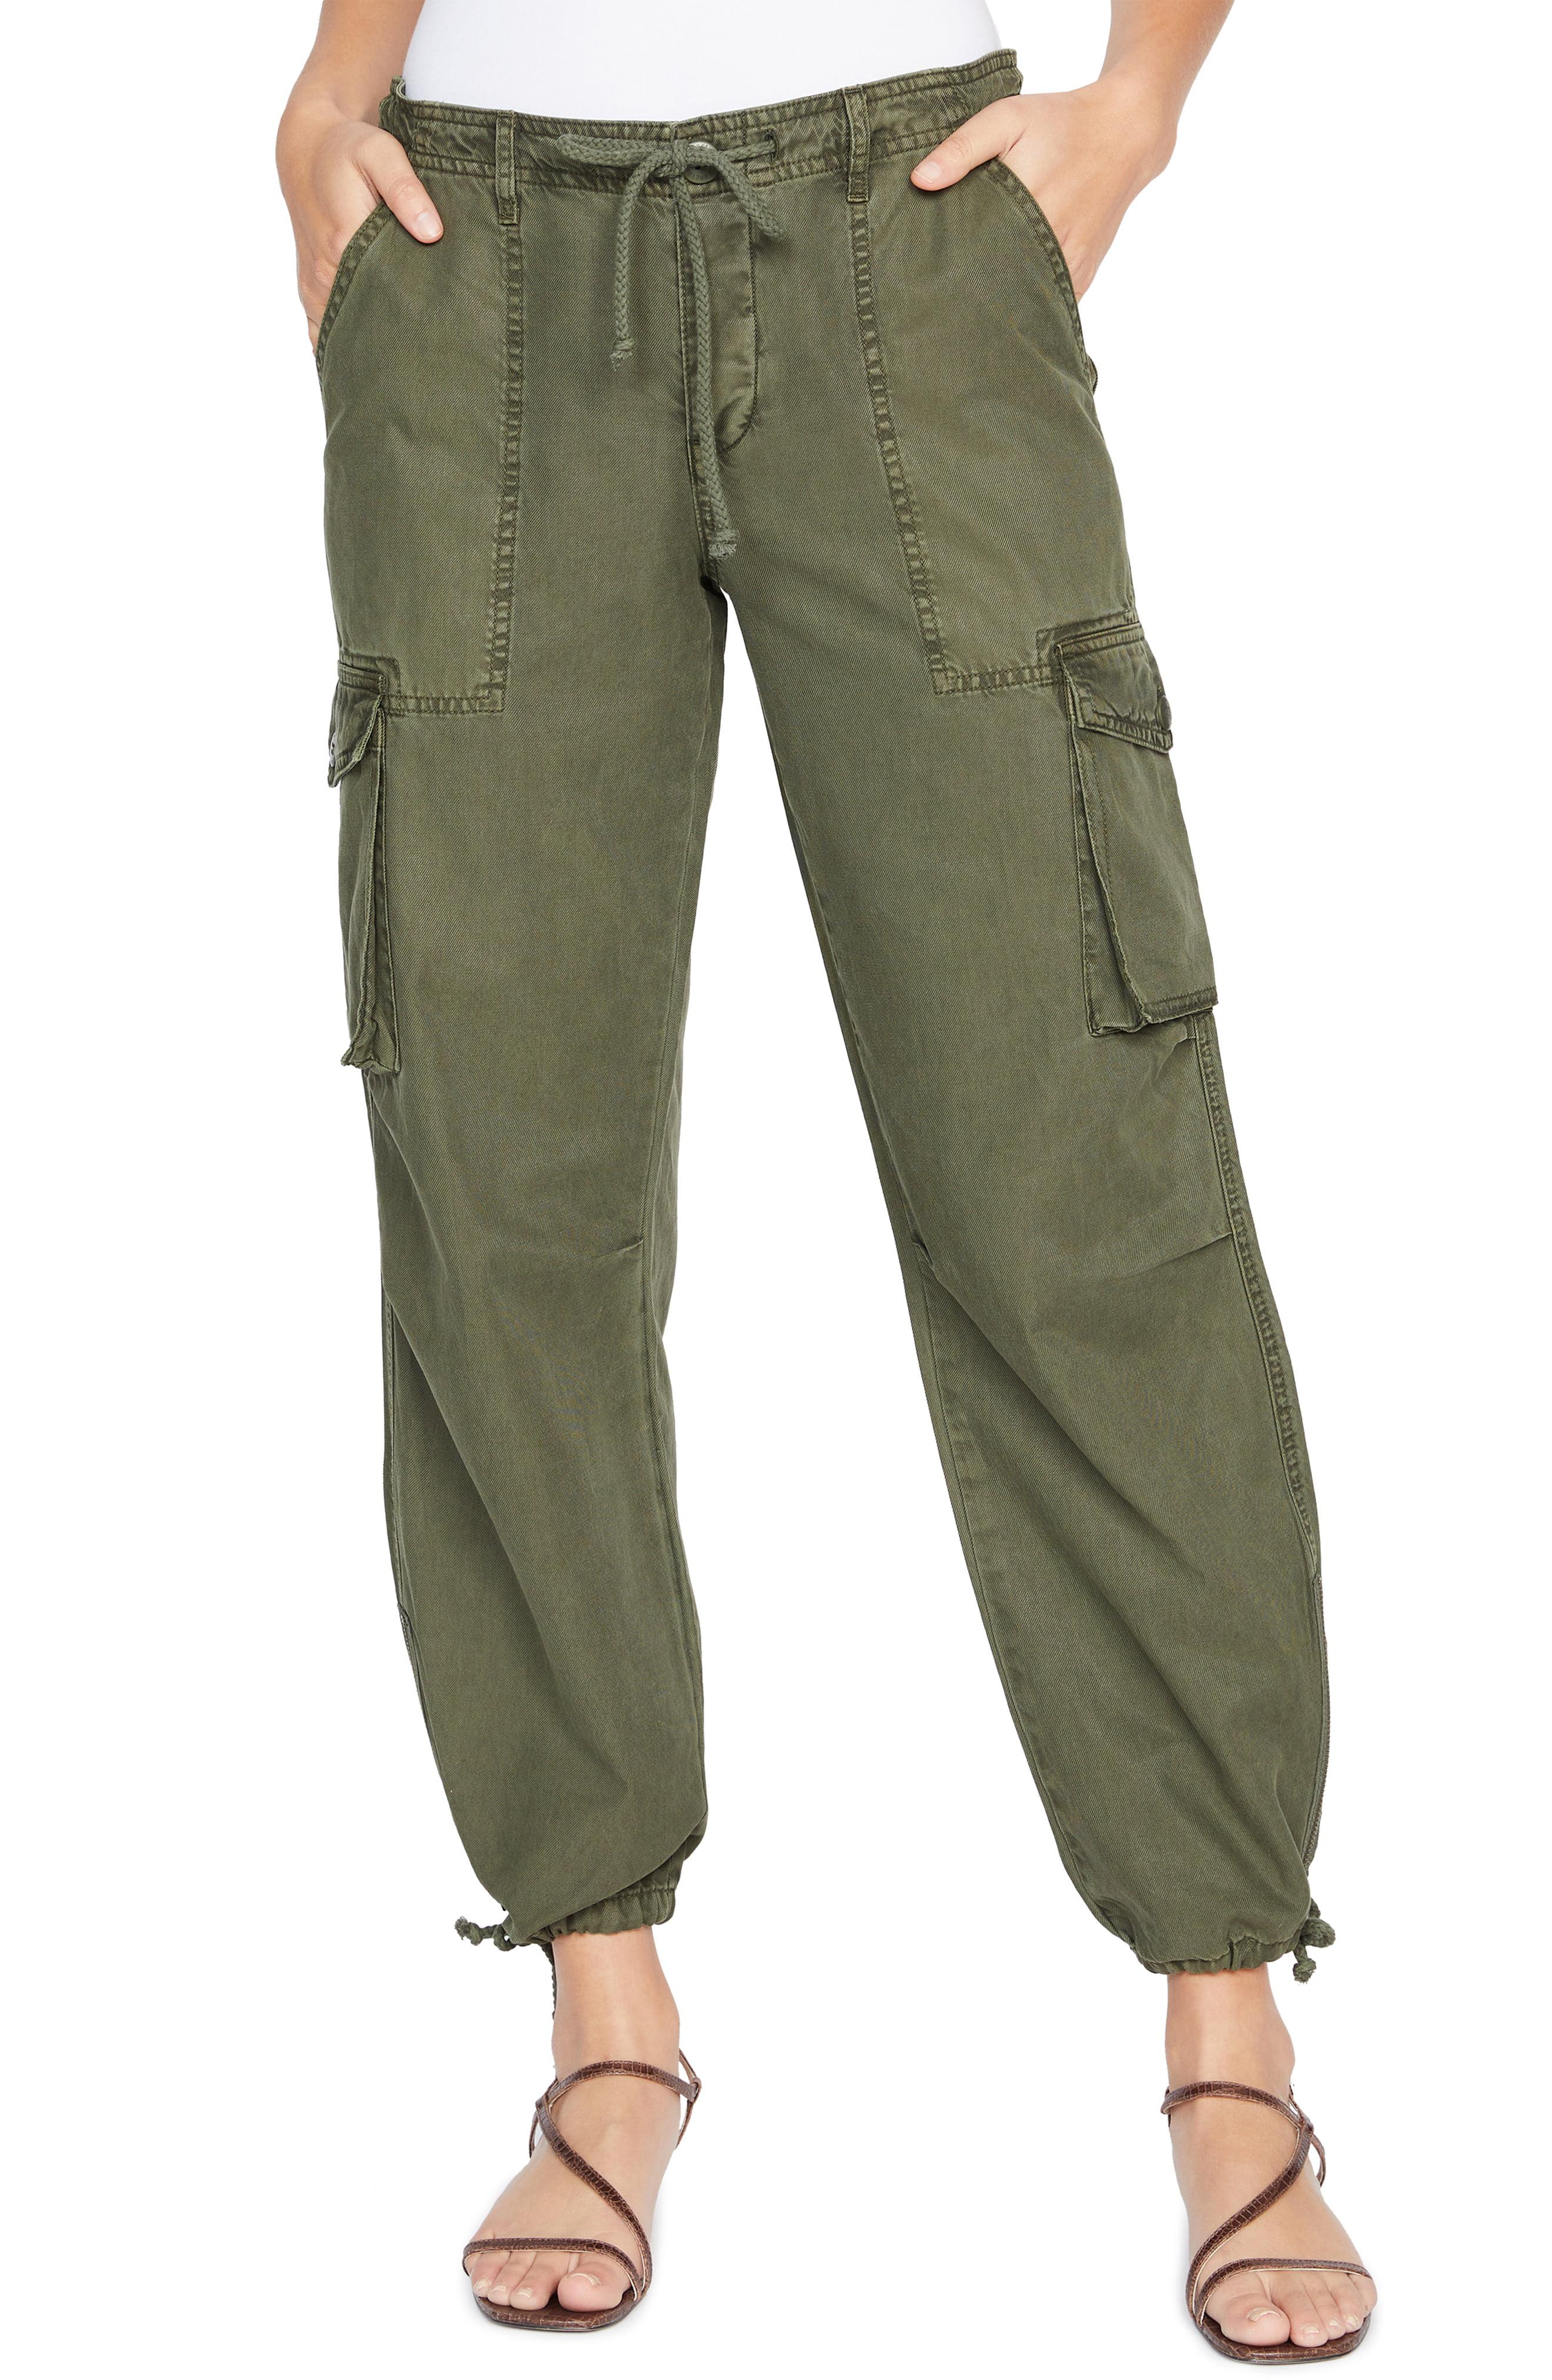 Sanctuary Cotton Paratrooper Cargo Pants in Army Green (Green) - Lyst